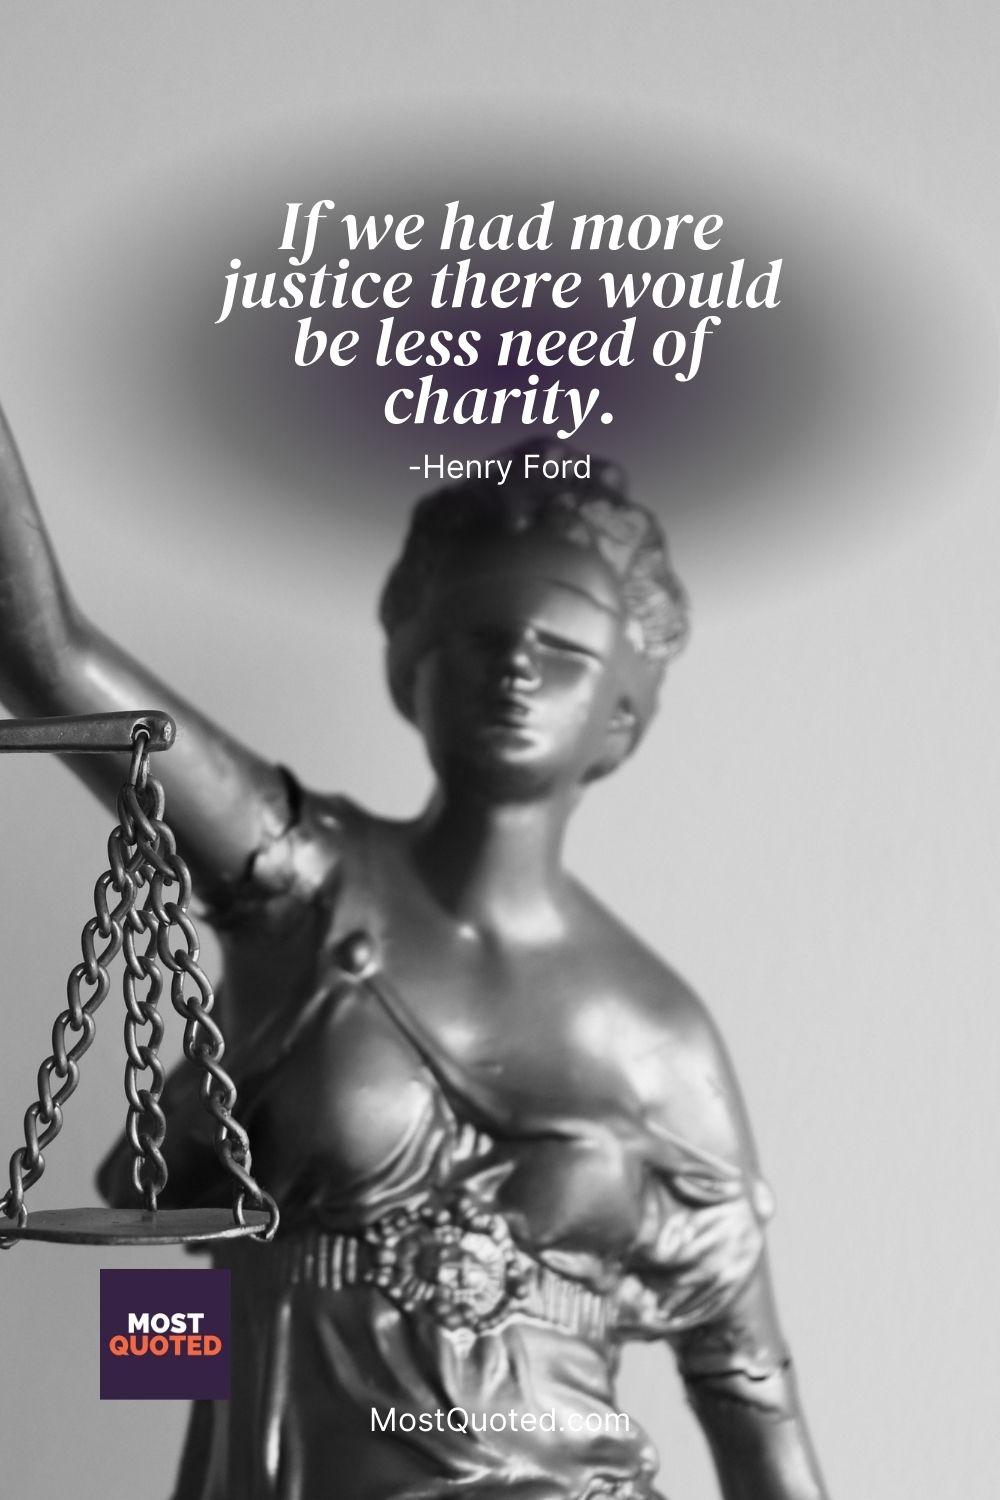 If we had more justice there would be less need of charity. - Henry Ford